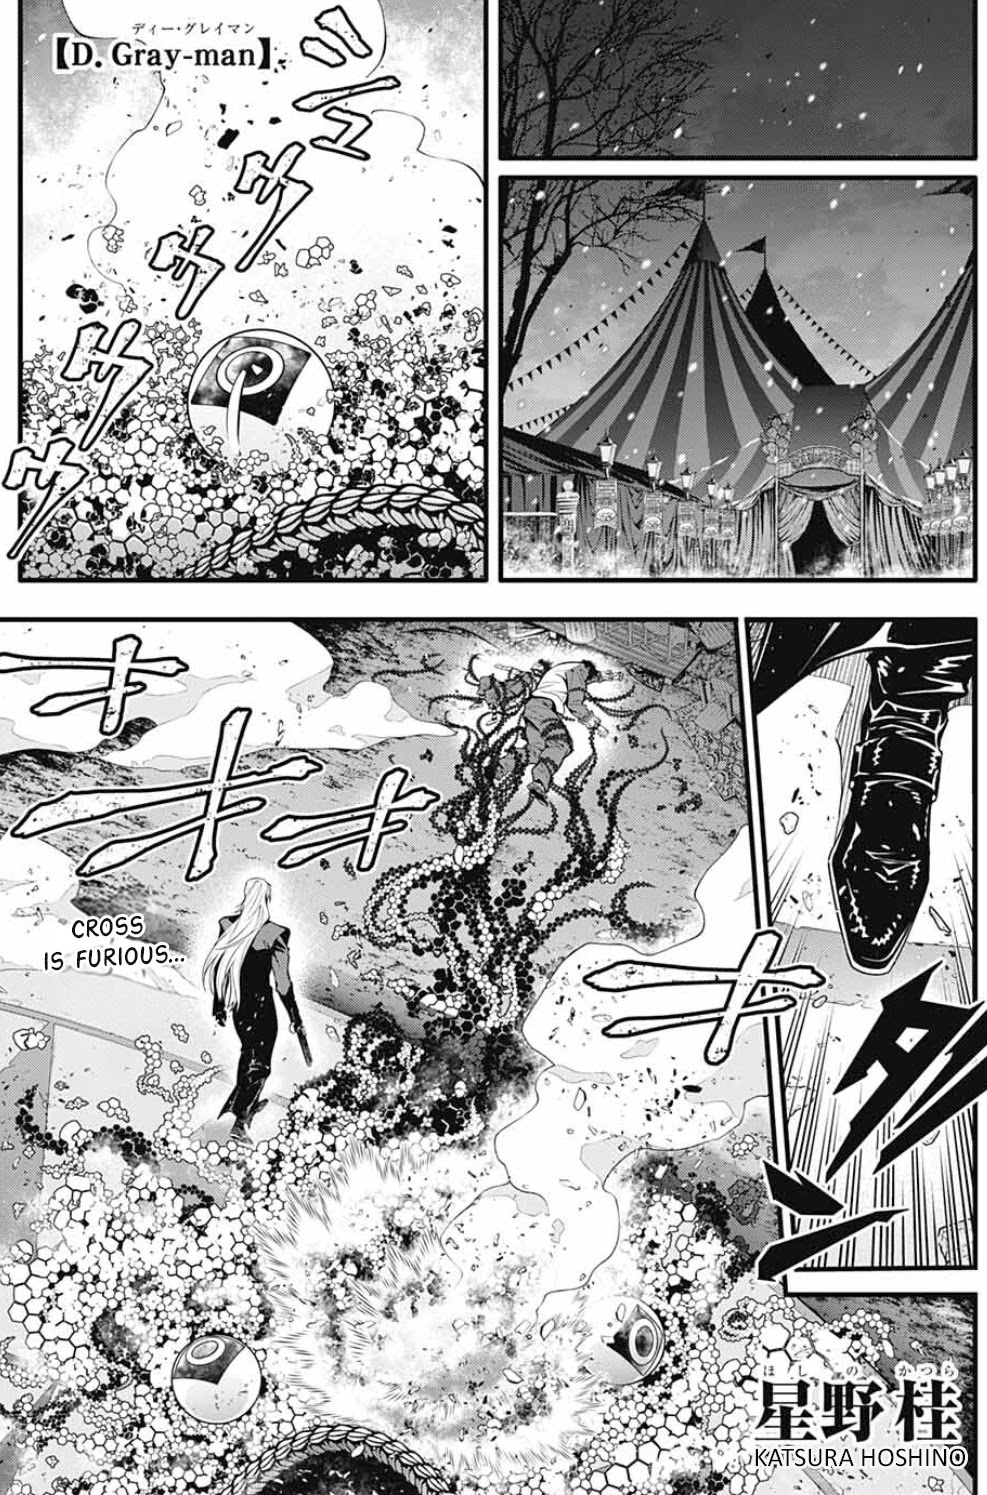 D.gray-Man Chapter 245: Farewell To A.w. - Red Handed And Mana⑨ - Picture 2